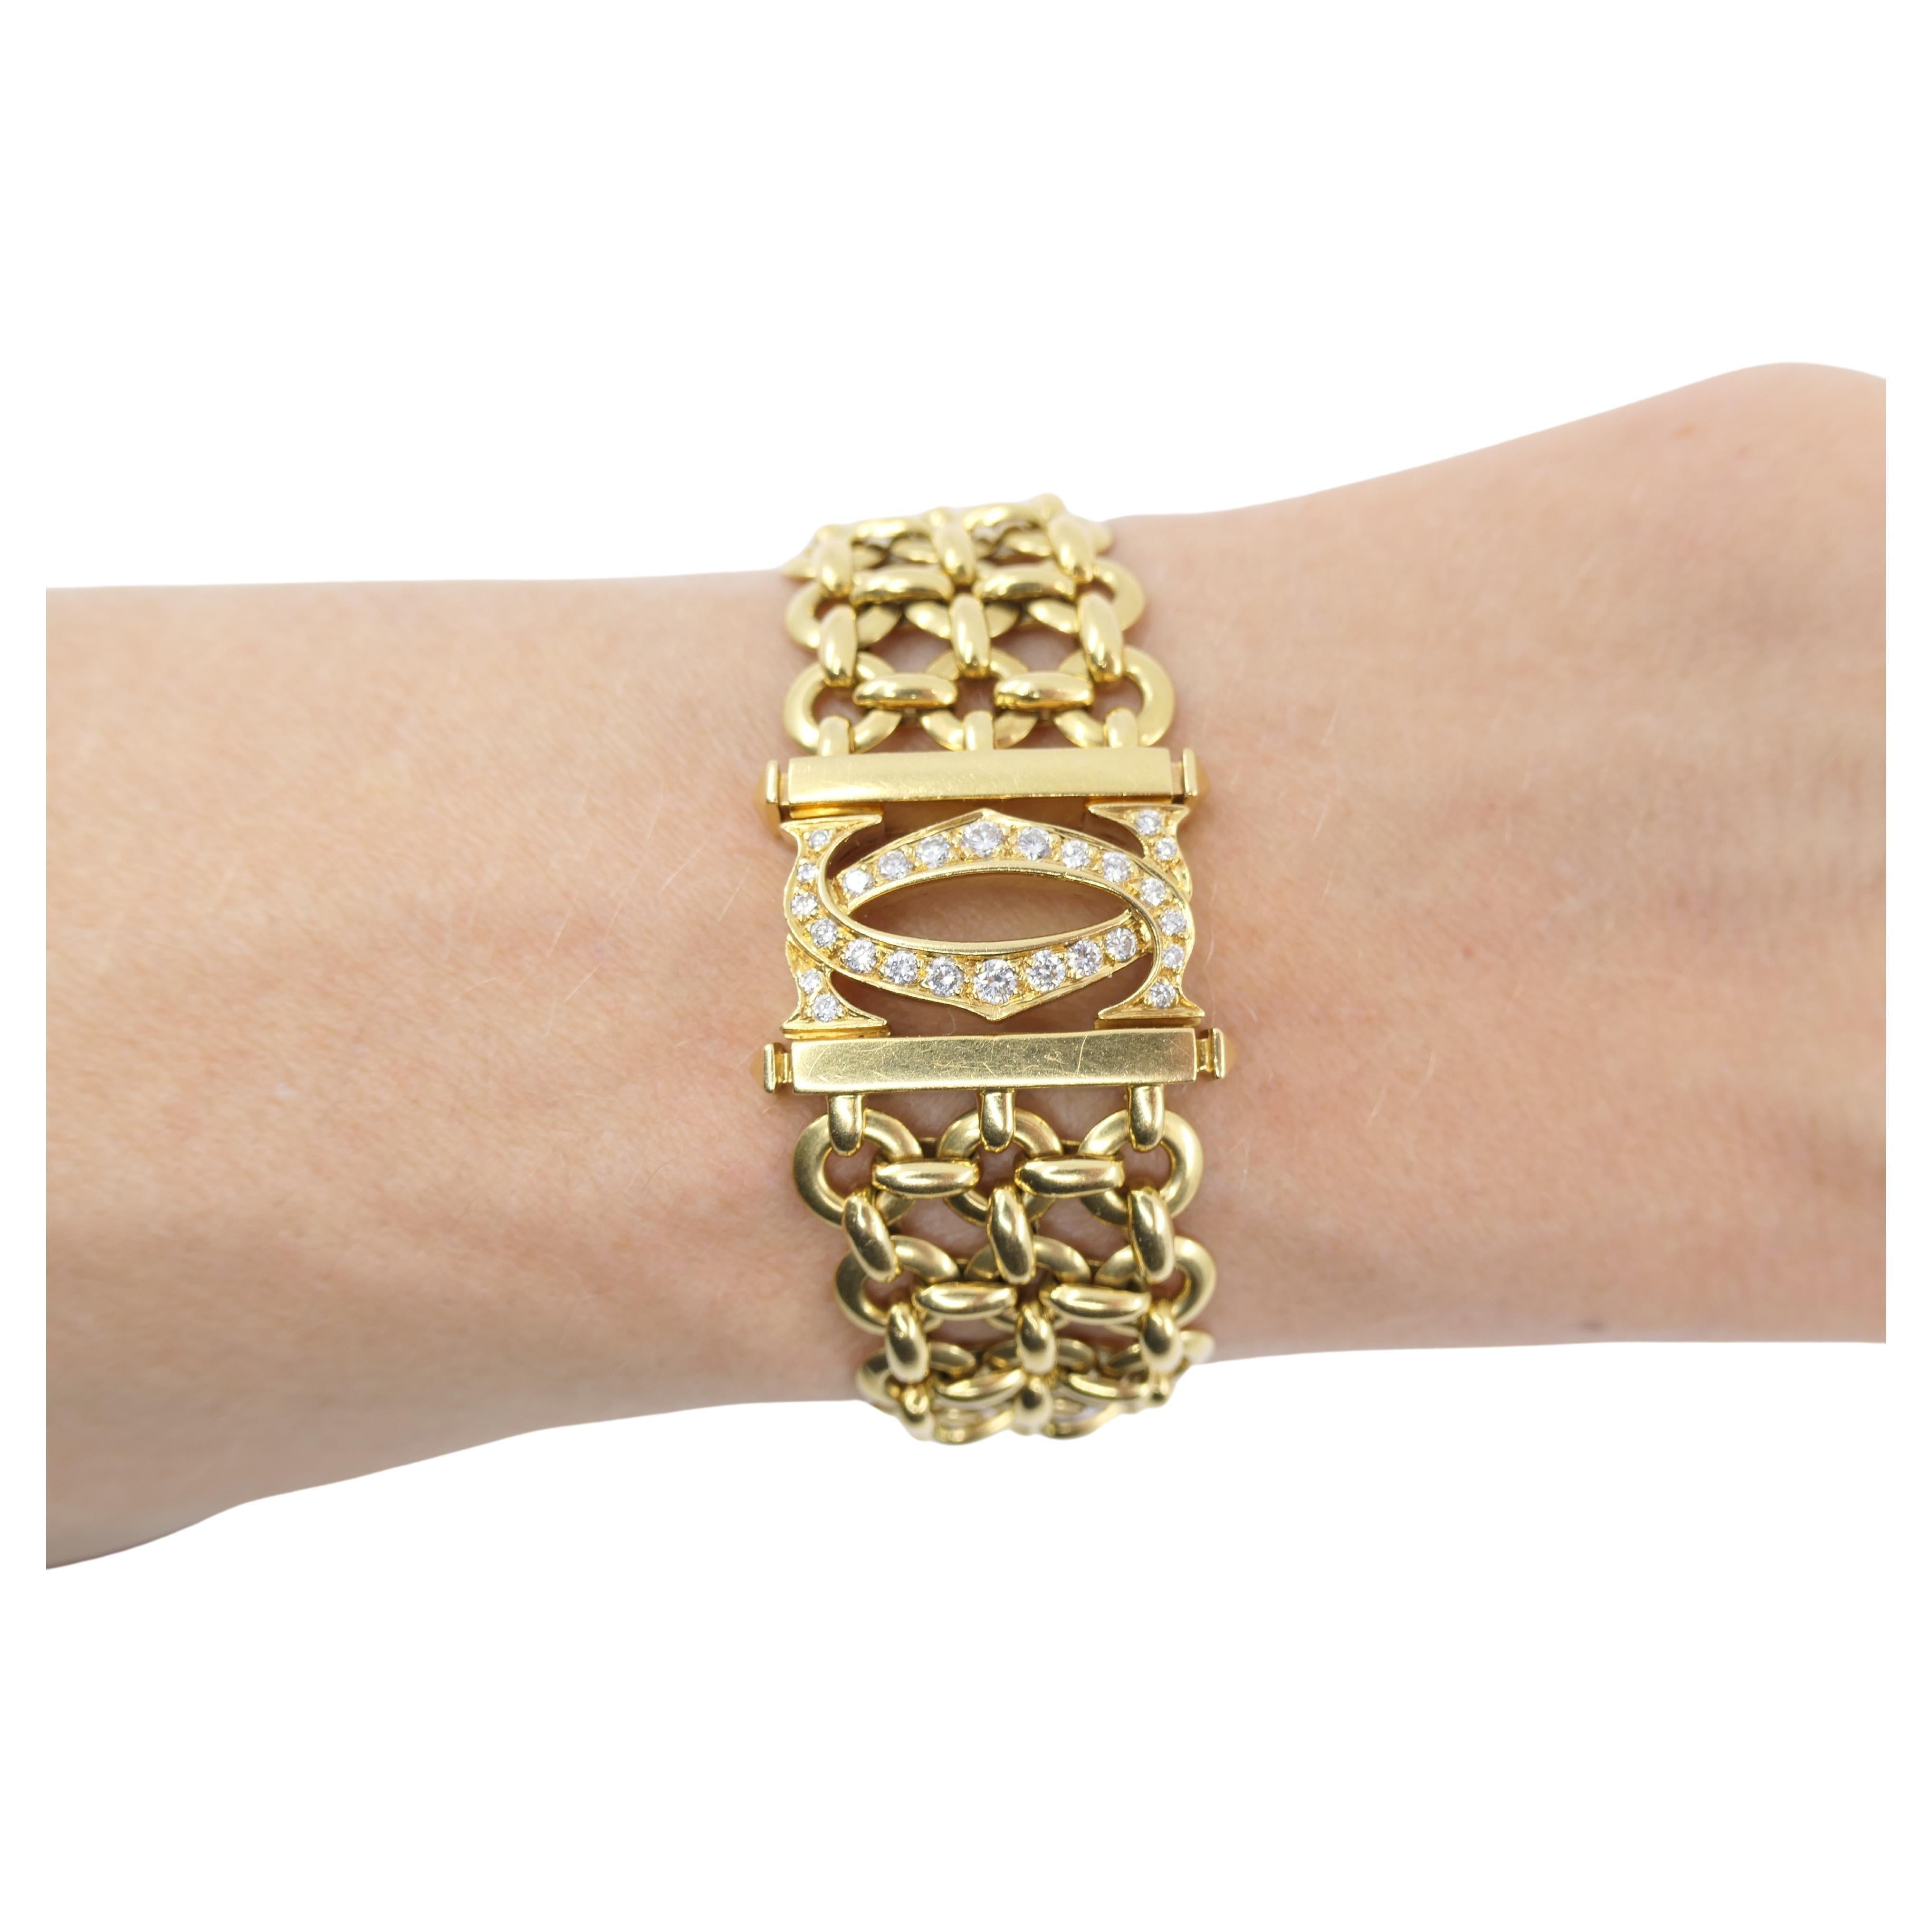 A vintage Cartier Double C 18k gold bracelet from Penelope collection. 
It's a mesh three-row link bracelet with a closure designed as the interlocking double C motif (the Cartier logo). The closure is a hidden push down clasp. 
The mesh comprises